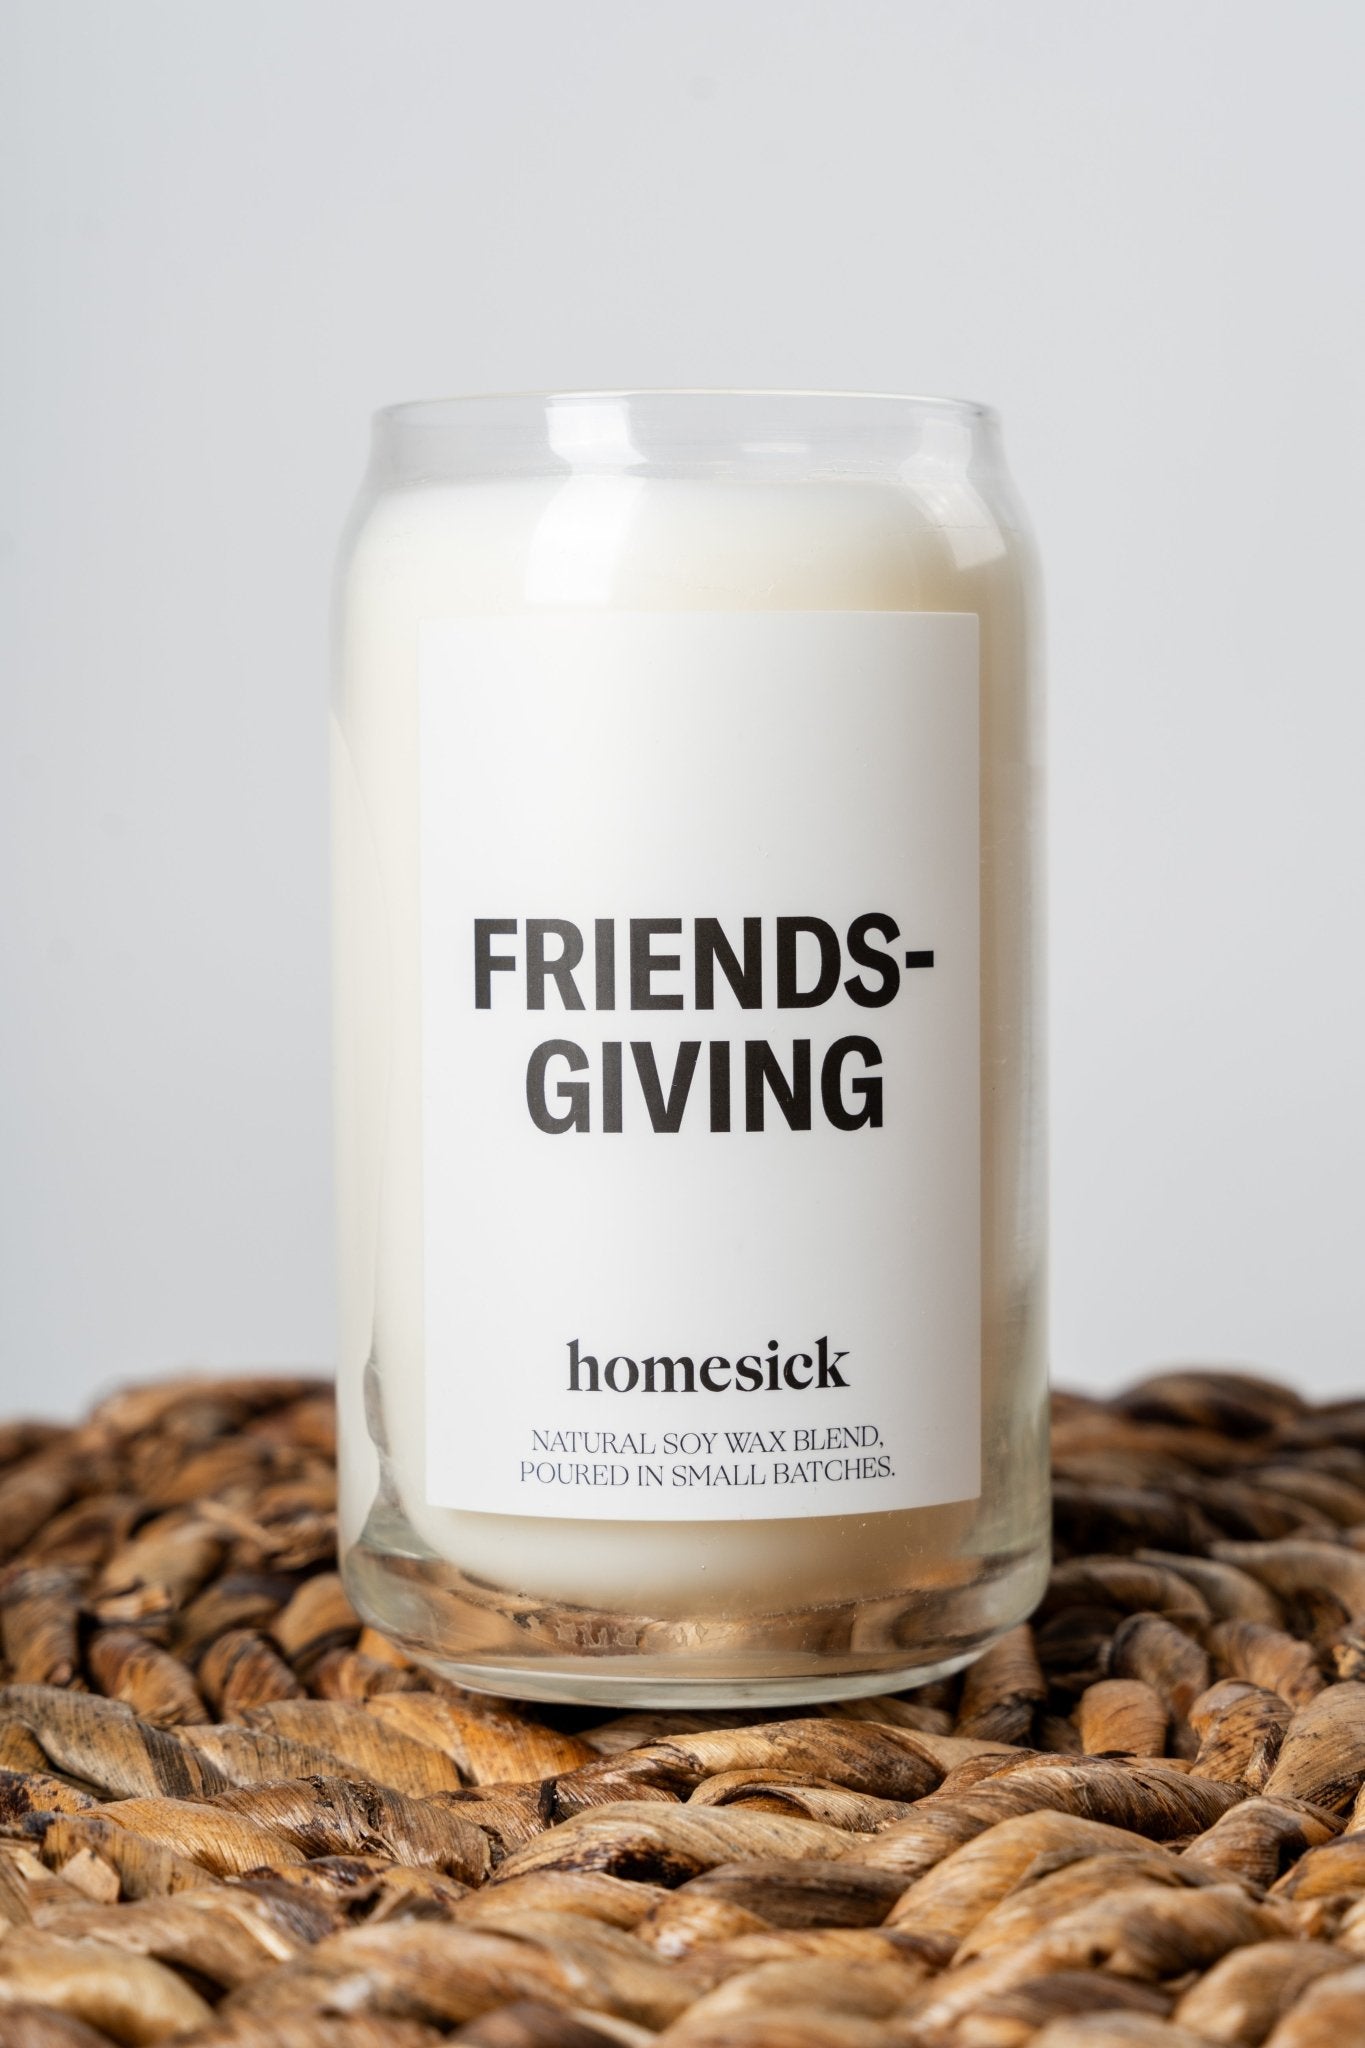 Homesick Friendsgiving candle - Trendy Candles at Lush Fashion Lounge Boutique in Oklahoma City